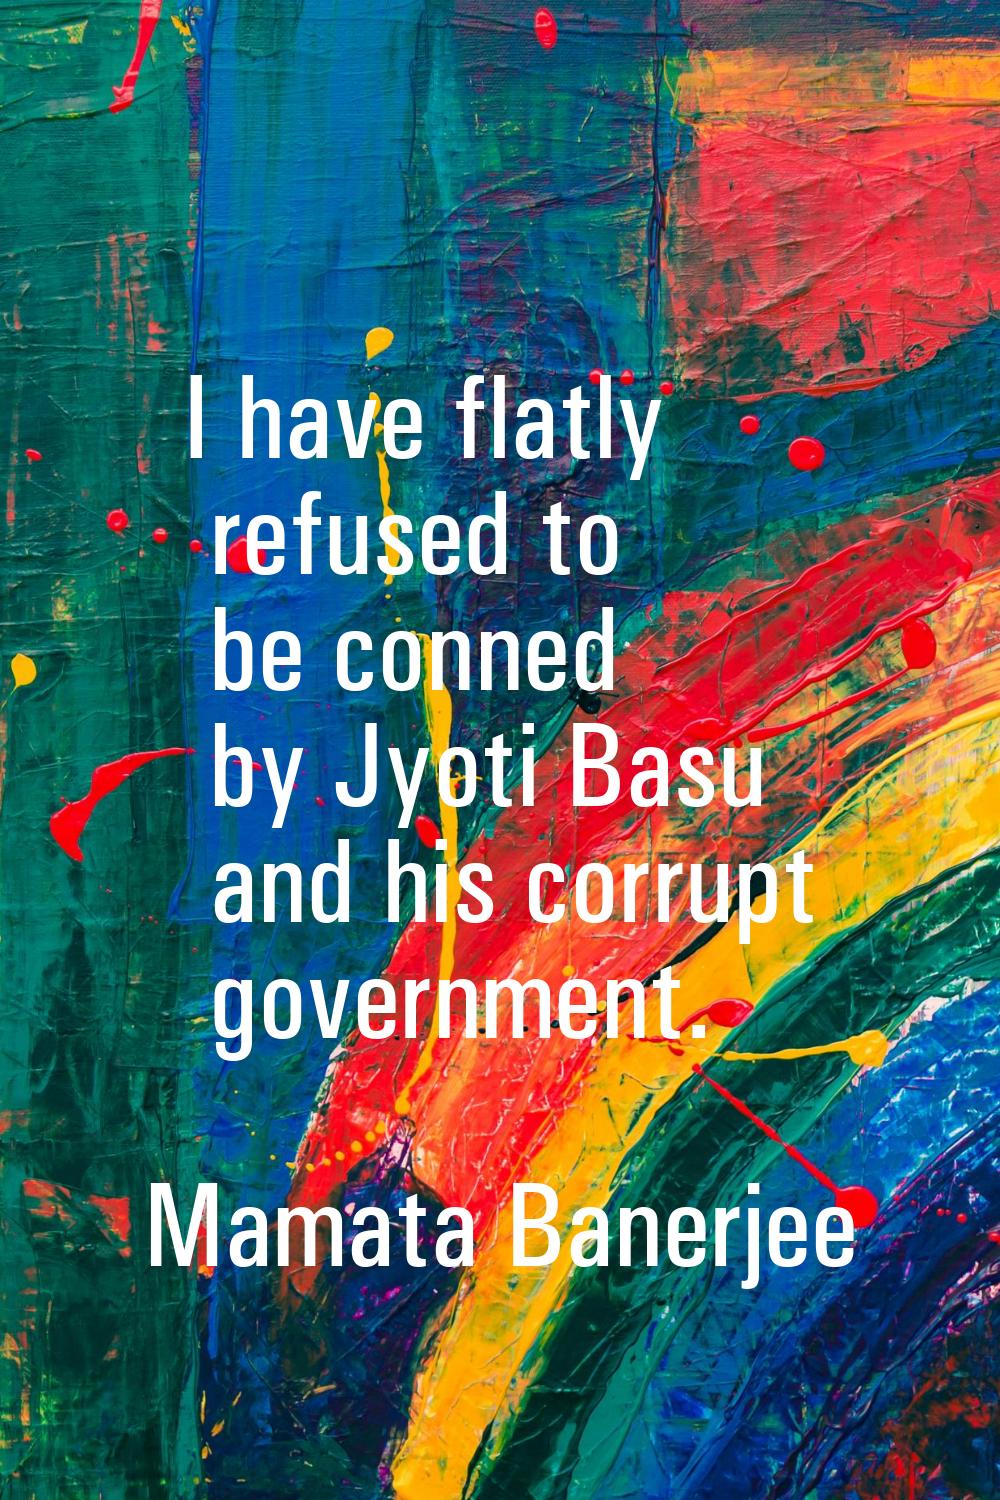 I have flatly refused to be conned by Jyoti Basu and his corrupt government.